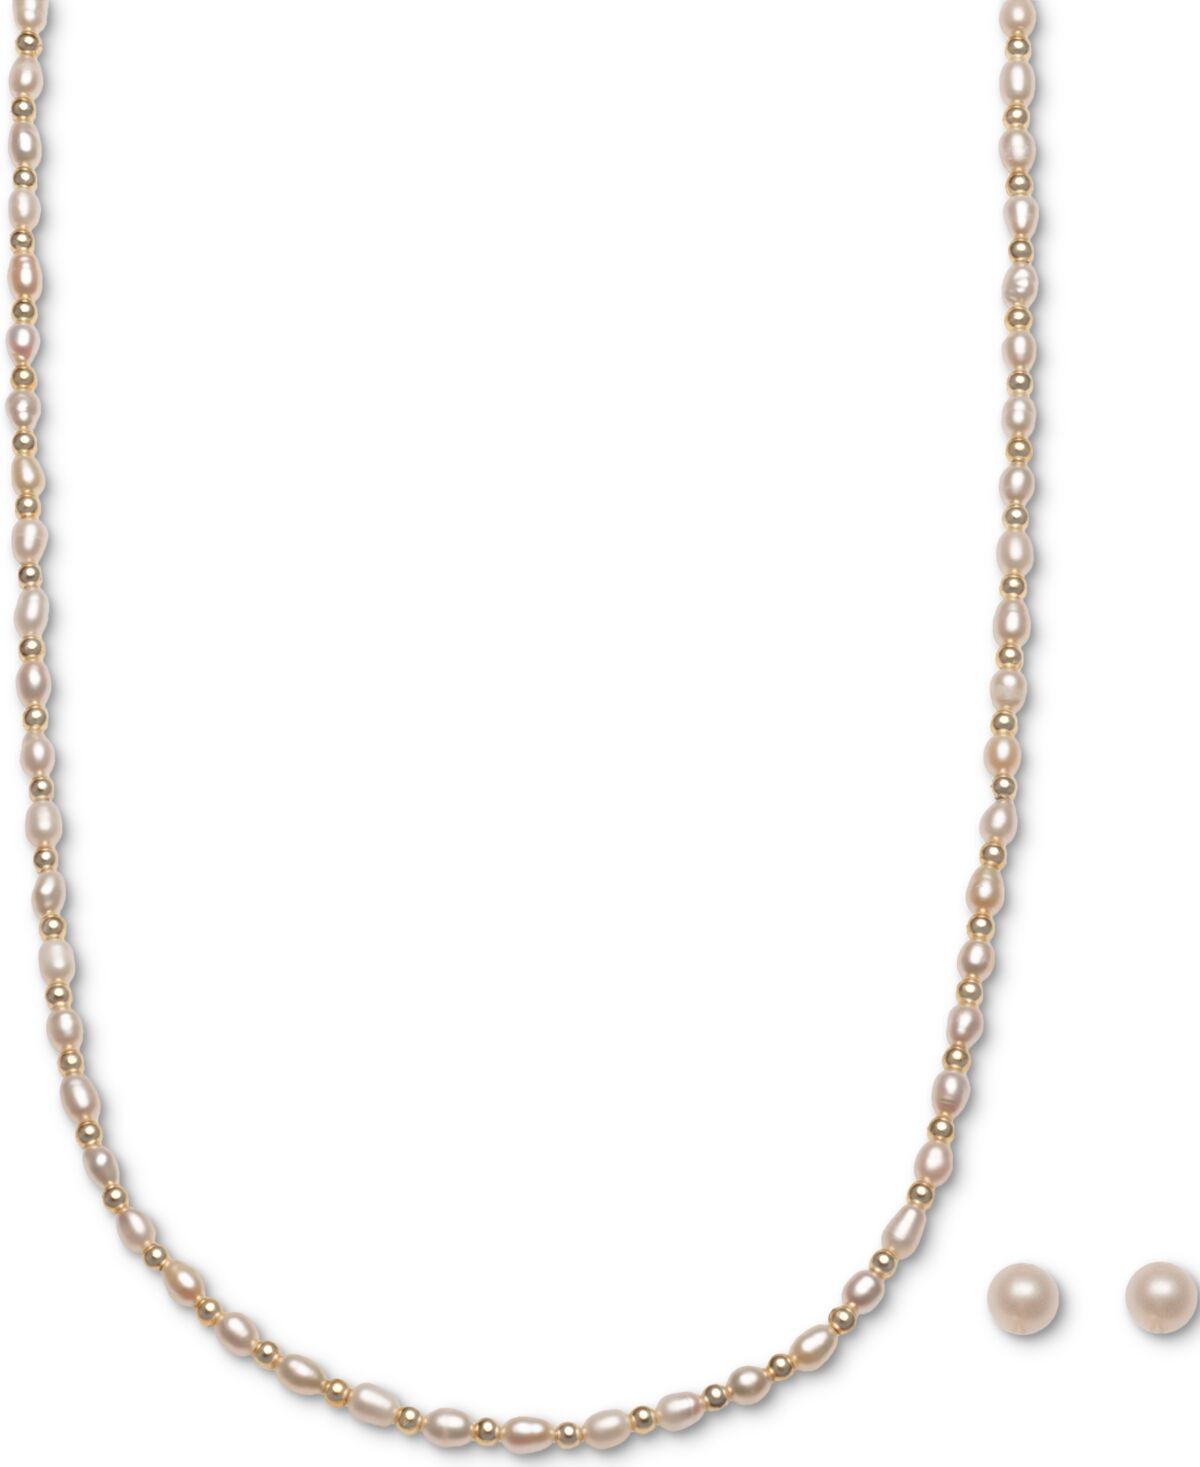 Macy's 2-Pc. Set Cultured Freshwater Pearl (4-5mm) Beaded Collar Necklace & Stud Earrings in 18k Gold-Plated Sterling Silver - Gold Over Silver